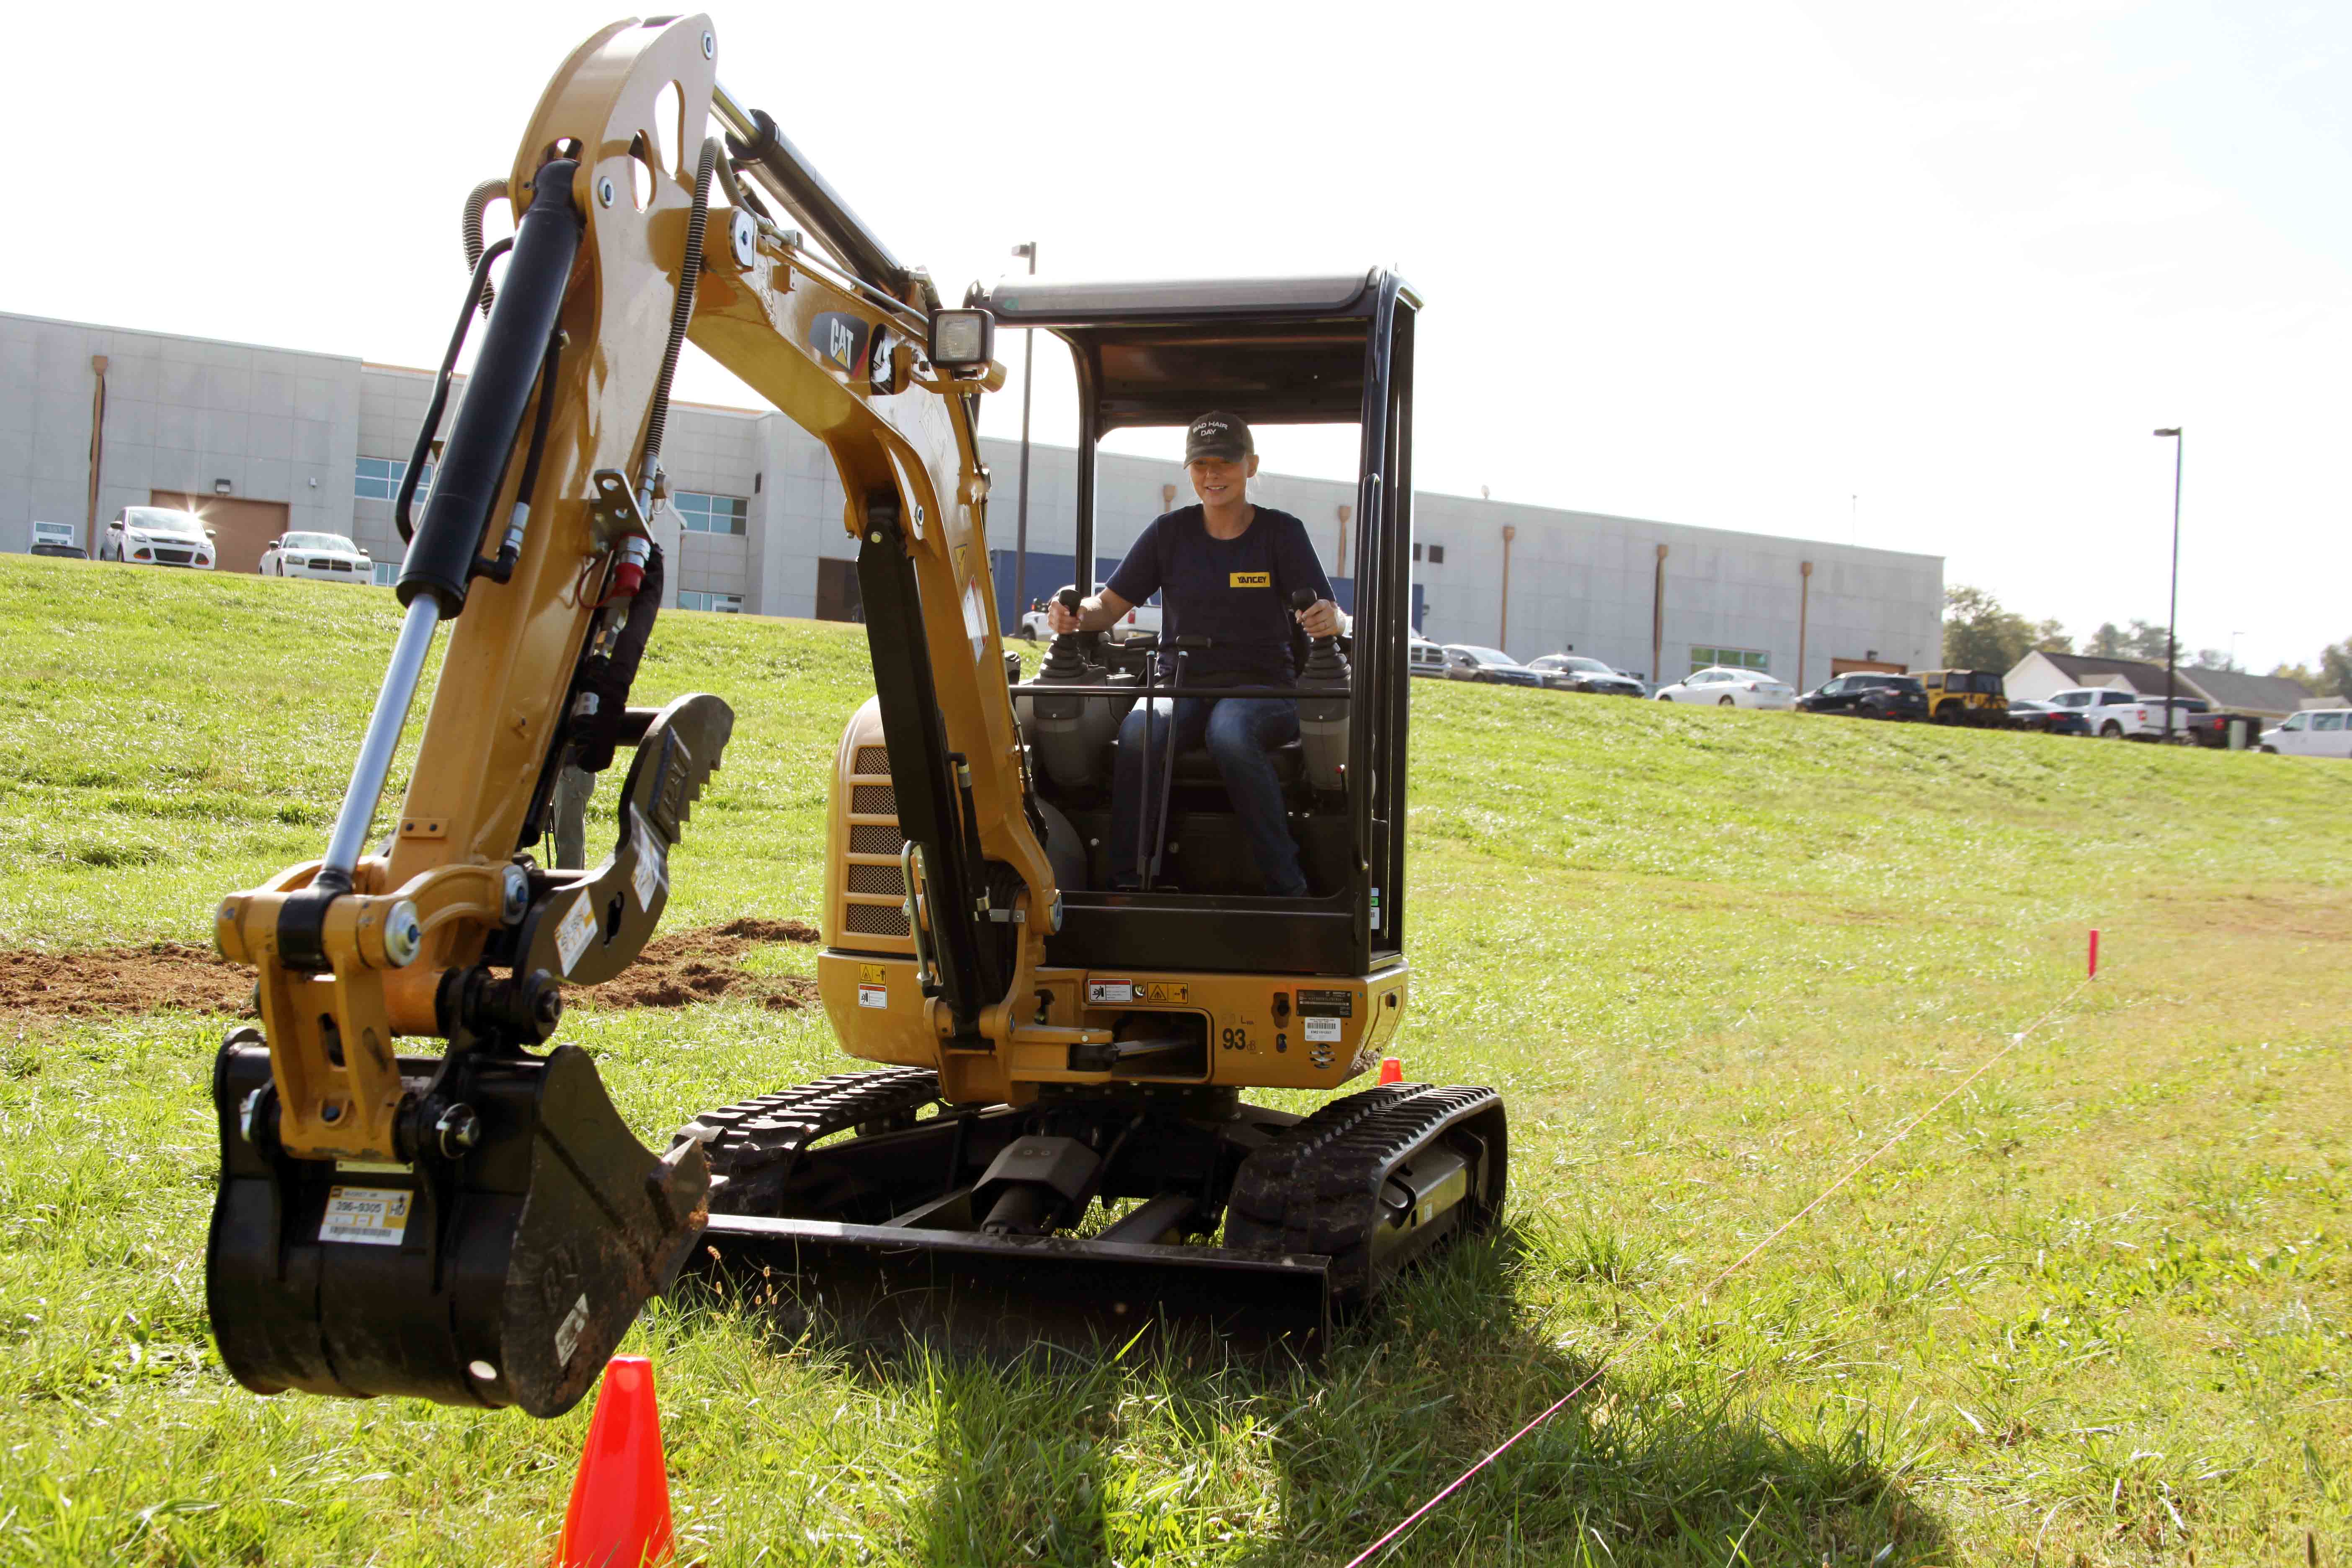 GNTC Construction Management student Jessica Heifner practices on her program’s excavator during an outdoor class session. 